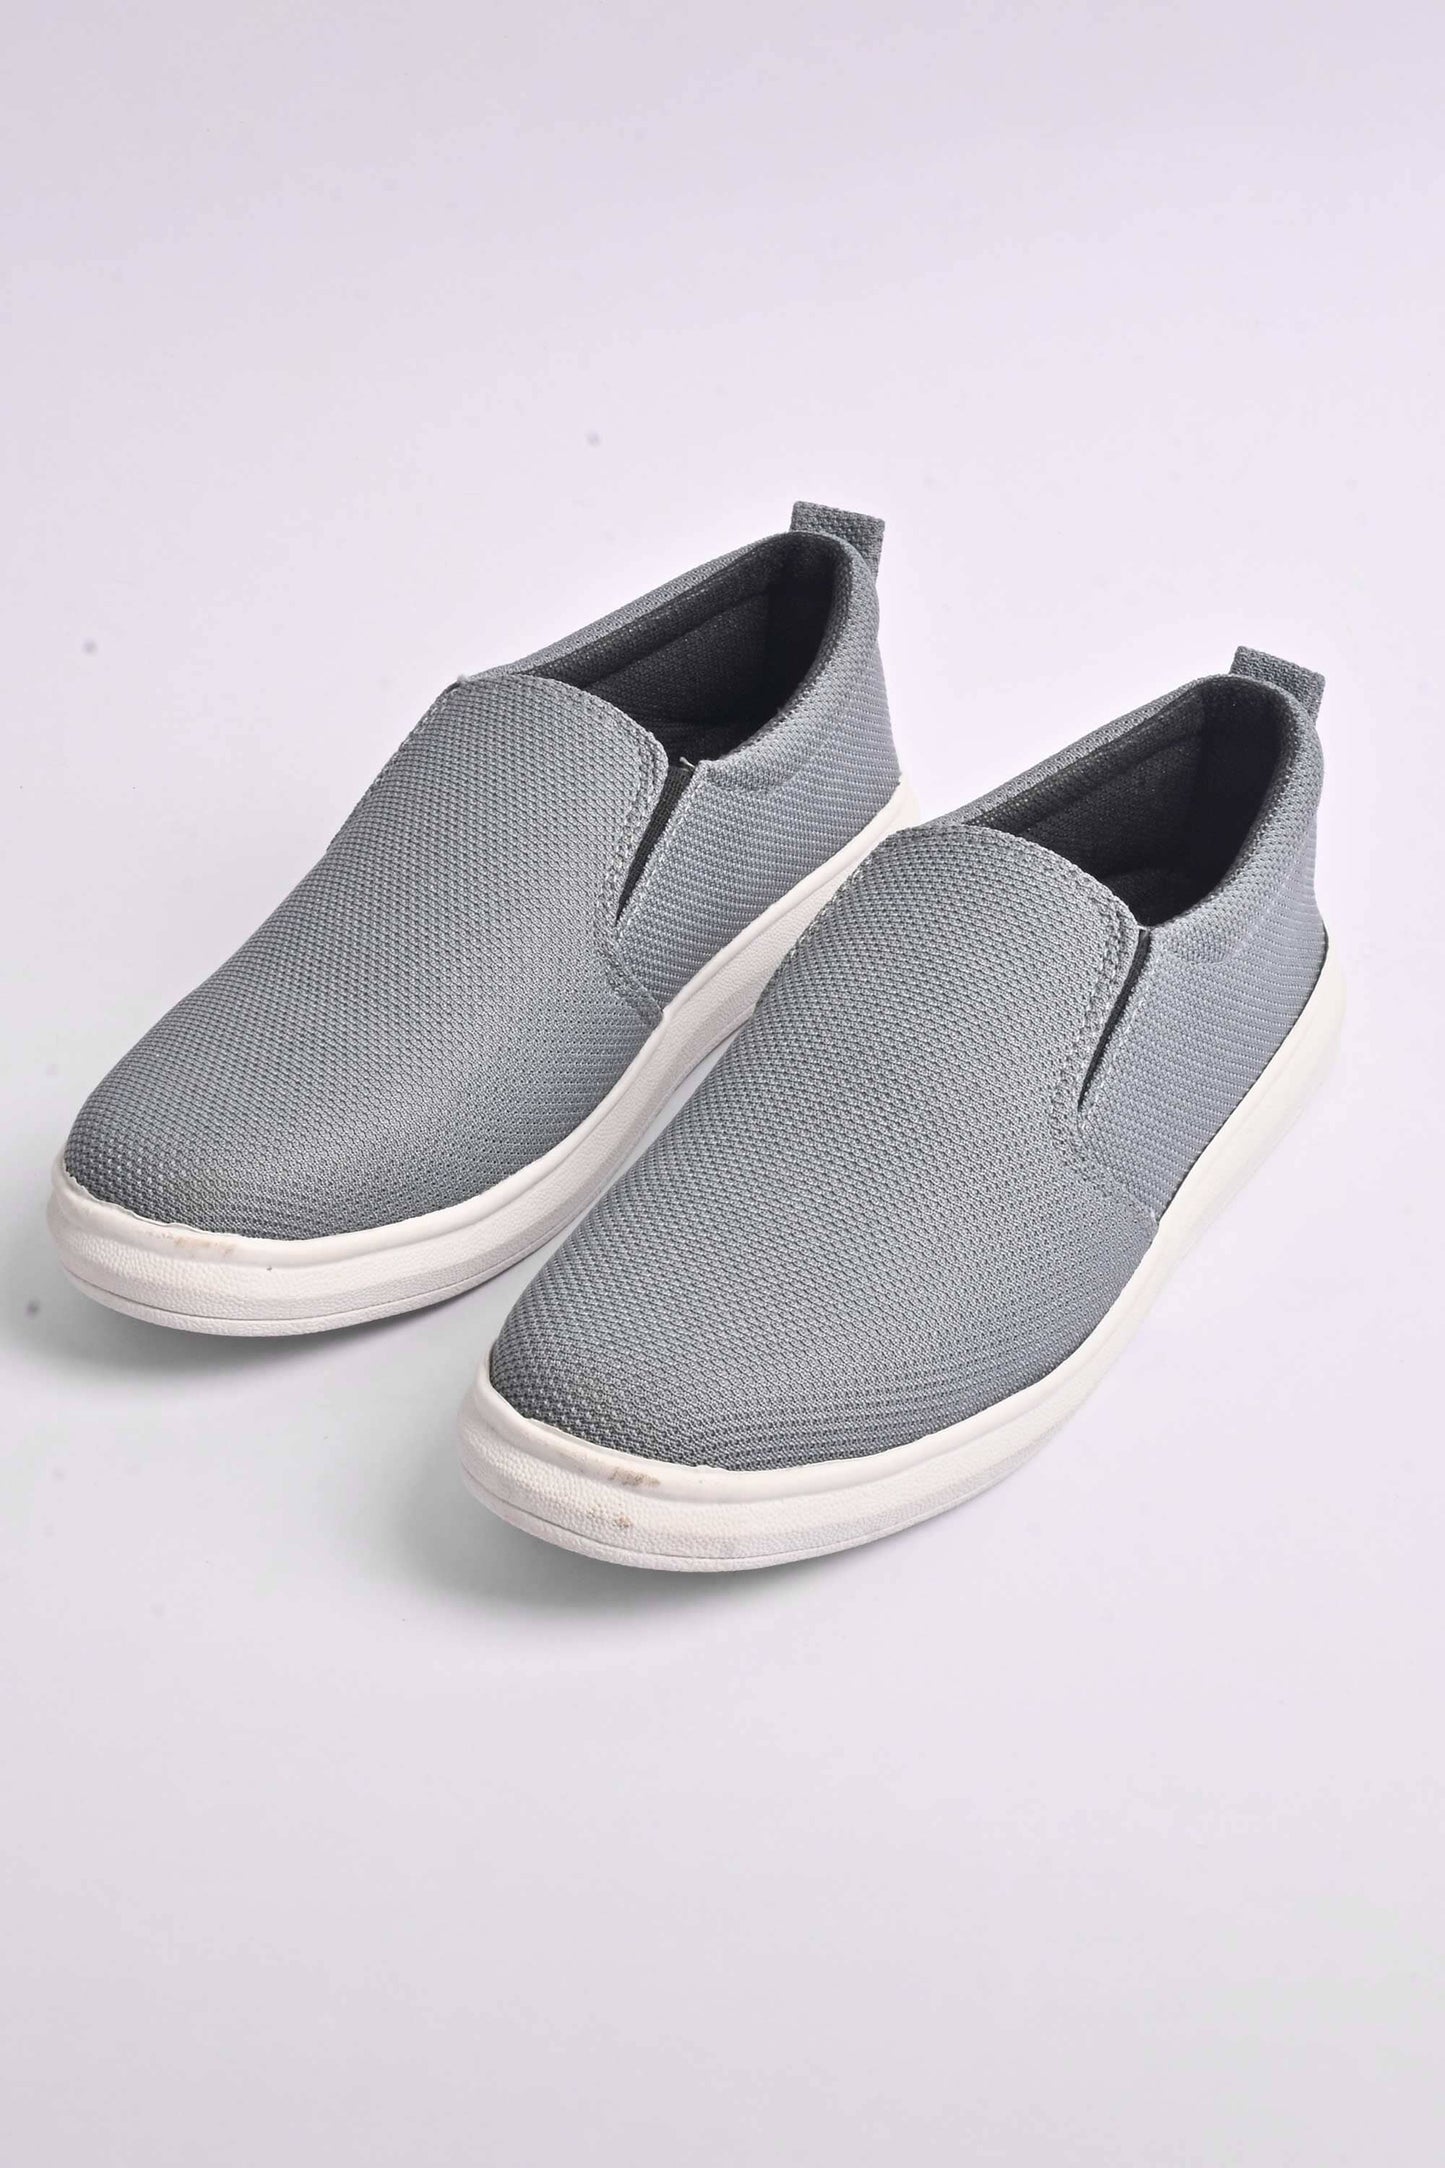 Men's Classic Comfortable Slip On Sneaker Shoes Men's Shoes SNAN Traders 